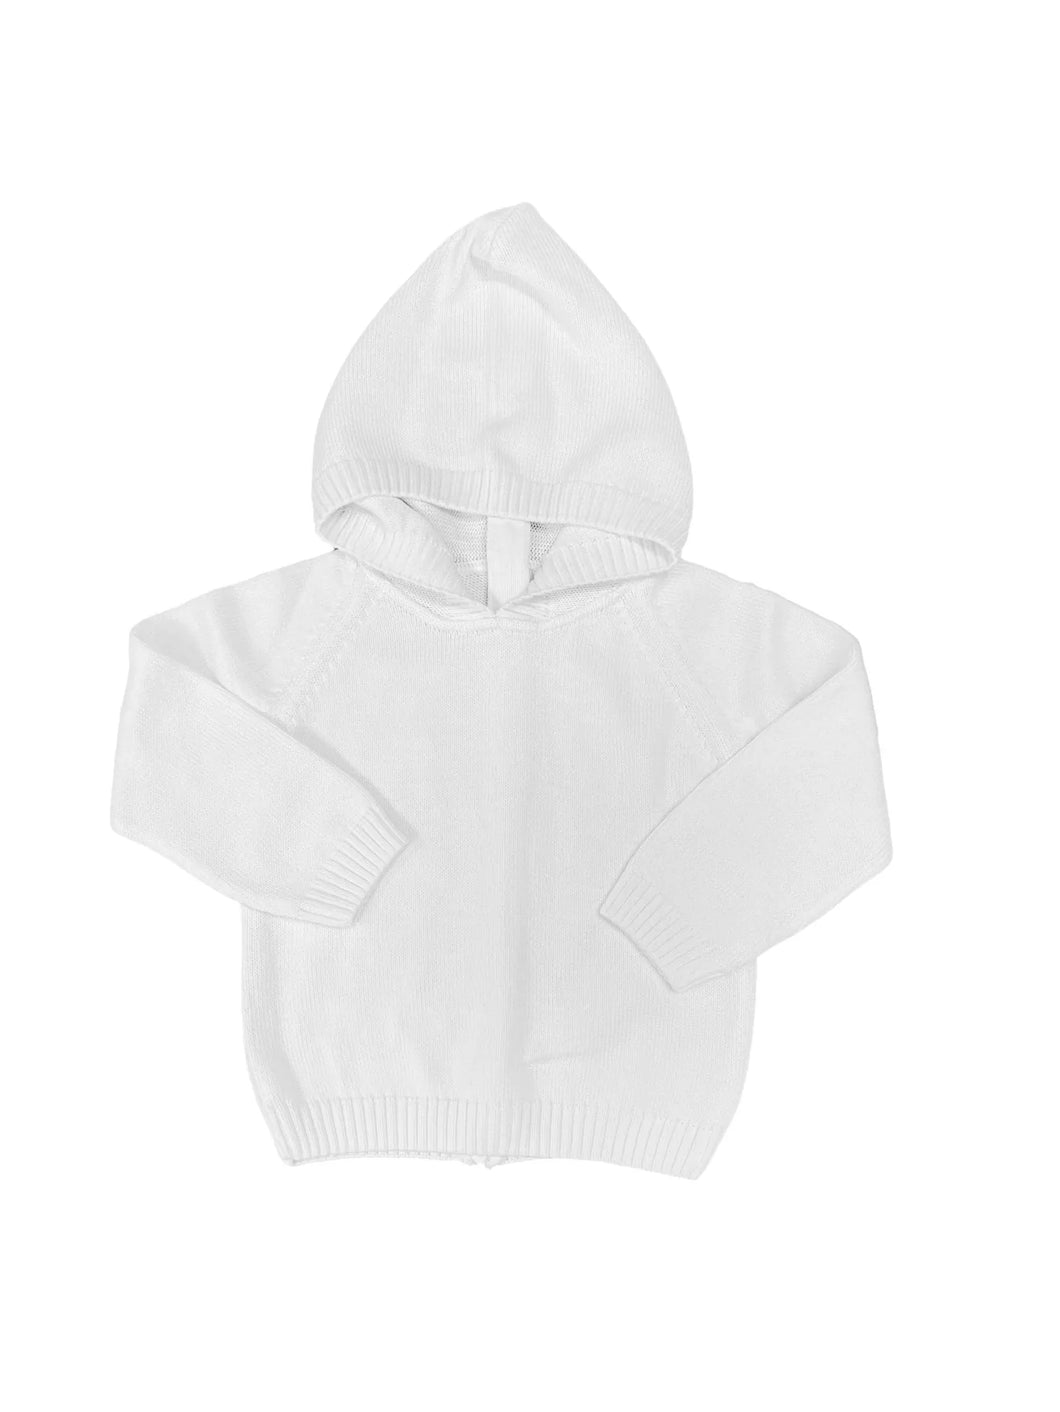 White Hooded Baby Sweater with Back Zipper